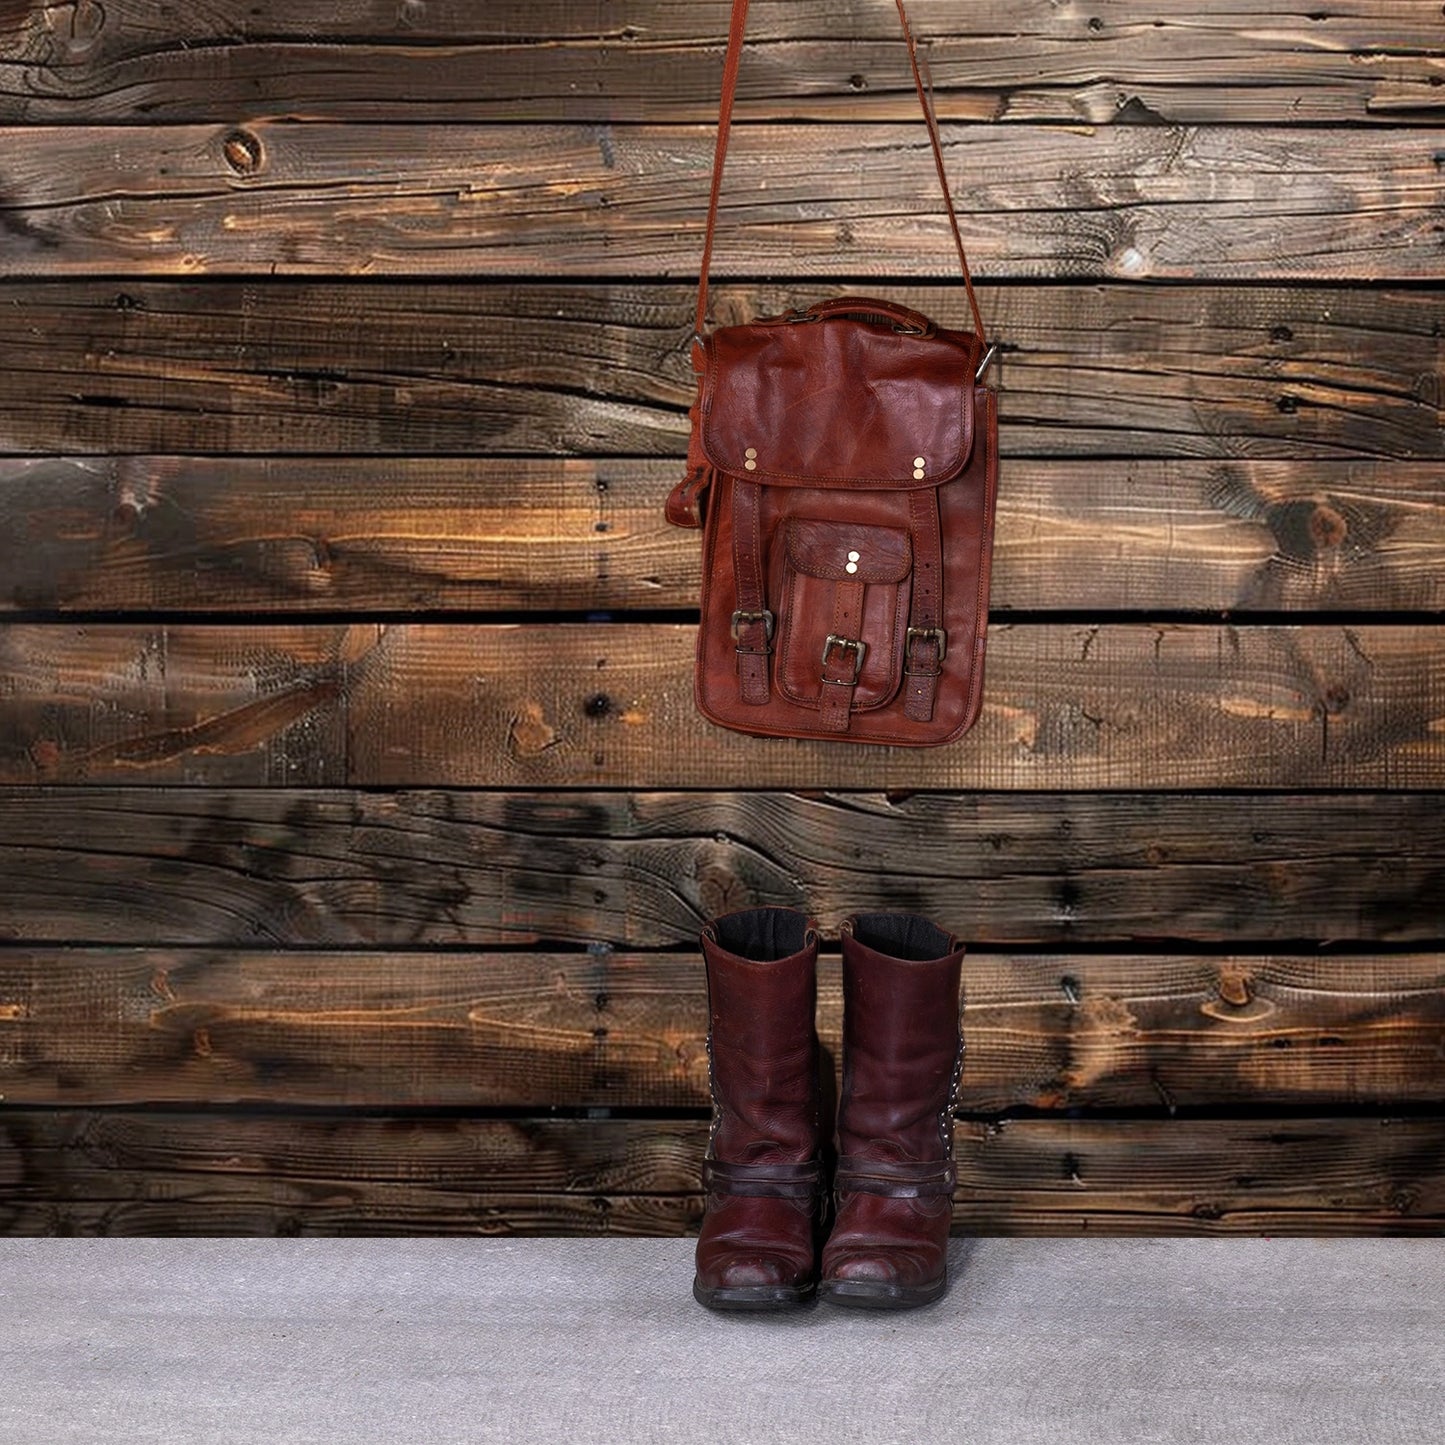 A brown leather satchel hangs on an ideasbackdrop Brown Wood Backdrop Photographers for Birthday Baby Shower Background Photo Booth Video Shoot Studio Prop, above a pair of matching brown leather boots on a gray carpet.